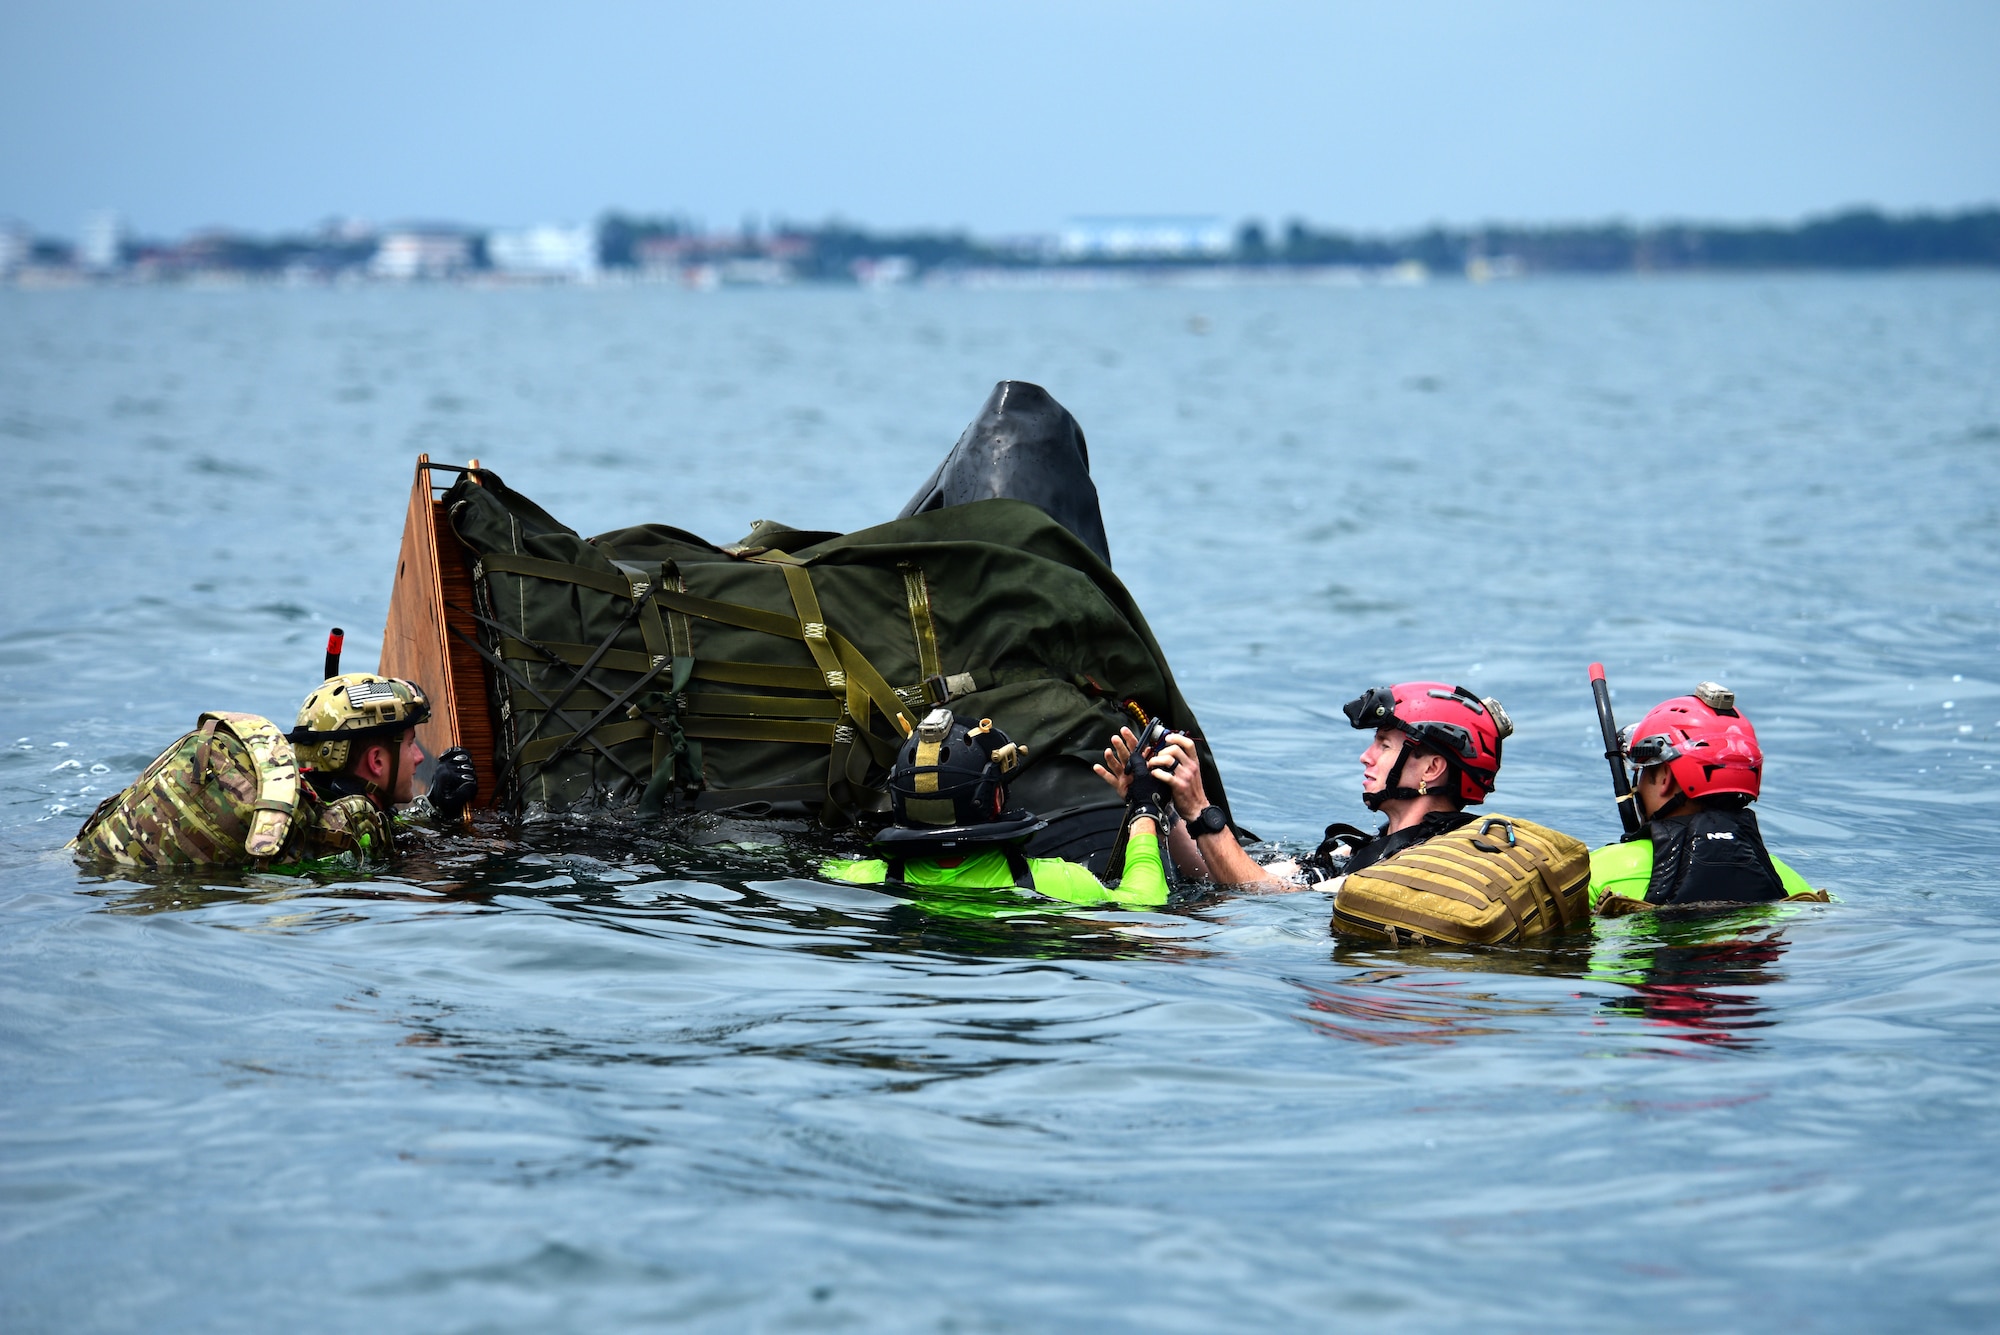 U.S. Air Force pararescuemen assigned to the 57th Rescue Squadron prepare a rigged alternate method zodiac (RAMZ) during over-water parachute training off the coast of Italy, July 9, 2019. The RAMZ is an inflatable, motorized boat that is airdropped alongside jumpers into the water. (U.S. Air Force photo by Staff Sgt. Kelsey Tucker)